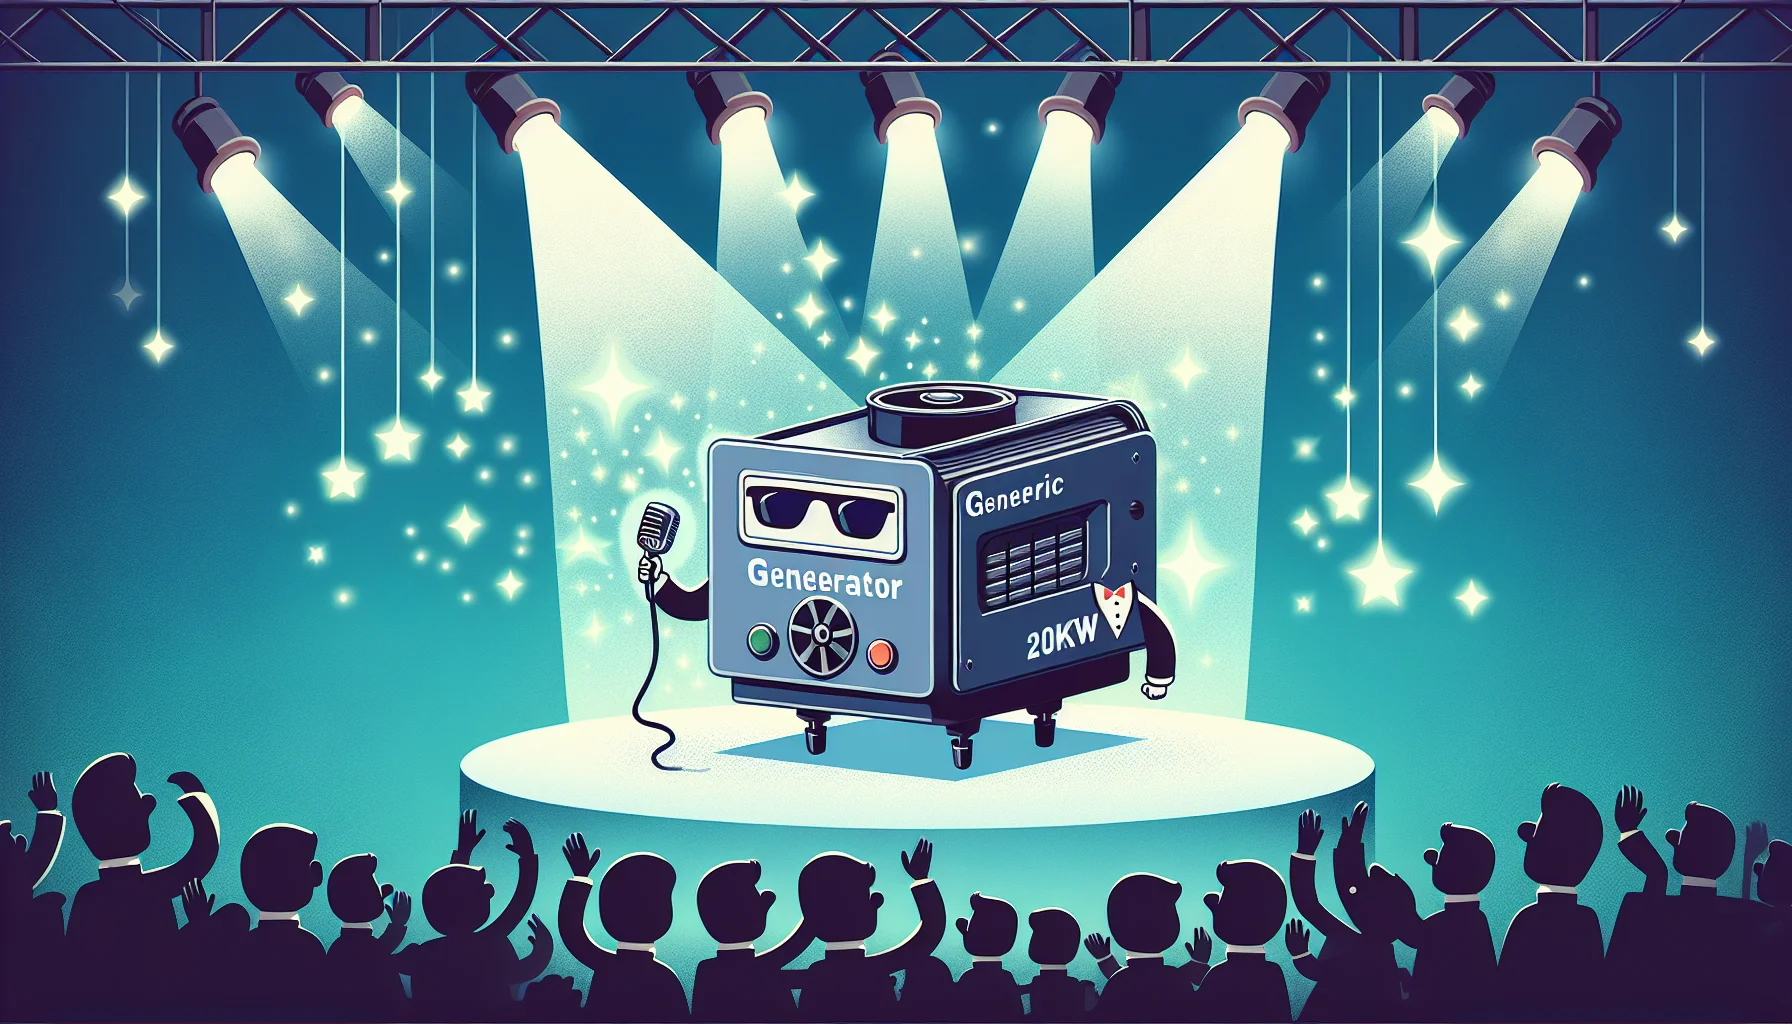 Create an image of a generic 20kW generator humorously dressed in a tuxedo, with sunglasses and a small hat. It's positioned on a stage under spotlights as if it's the star of the show. The generator seems to be enjoying the attention, with electrical sparks flying off it like magical tricks. This pitches the idea that generating electricity is not only necessary but can be fun and exciting too. There are cartoon characters in the audience, laughing, clapping, and clearly amazed by what they see.